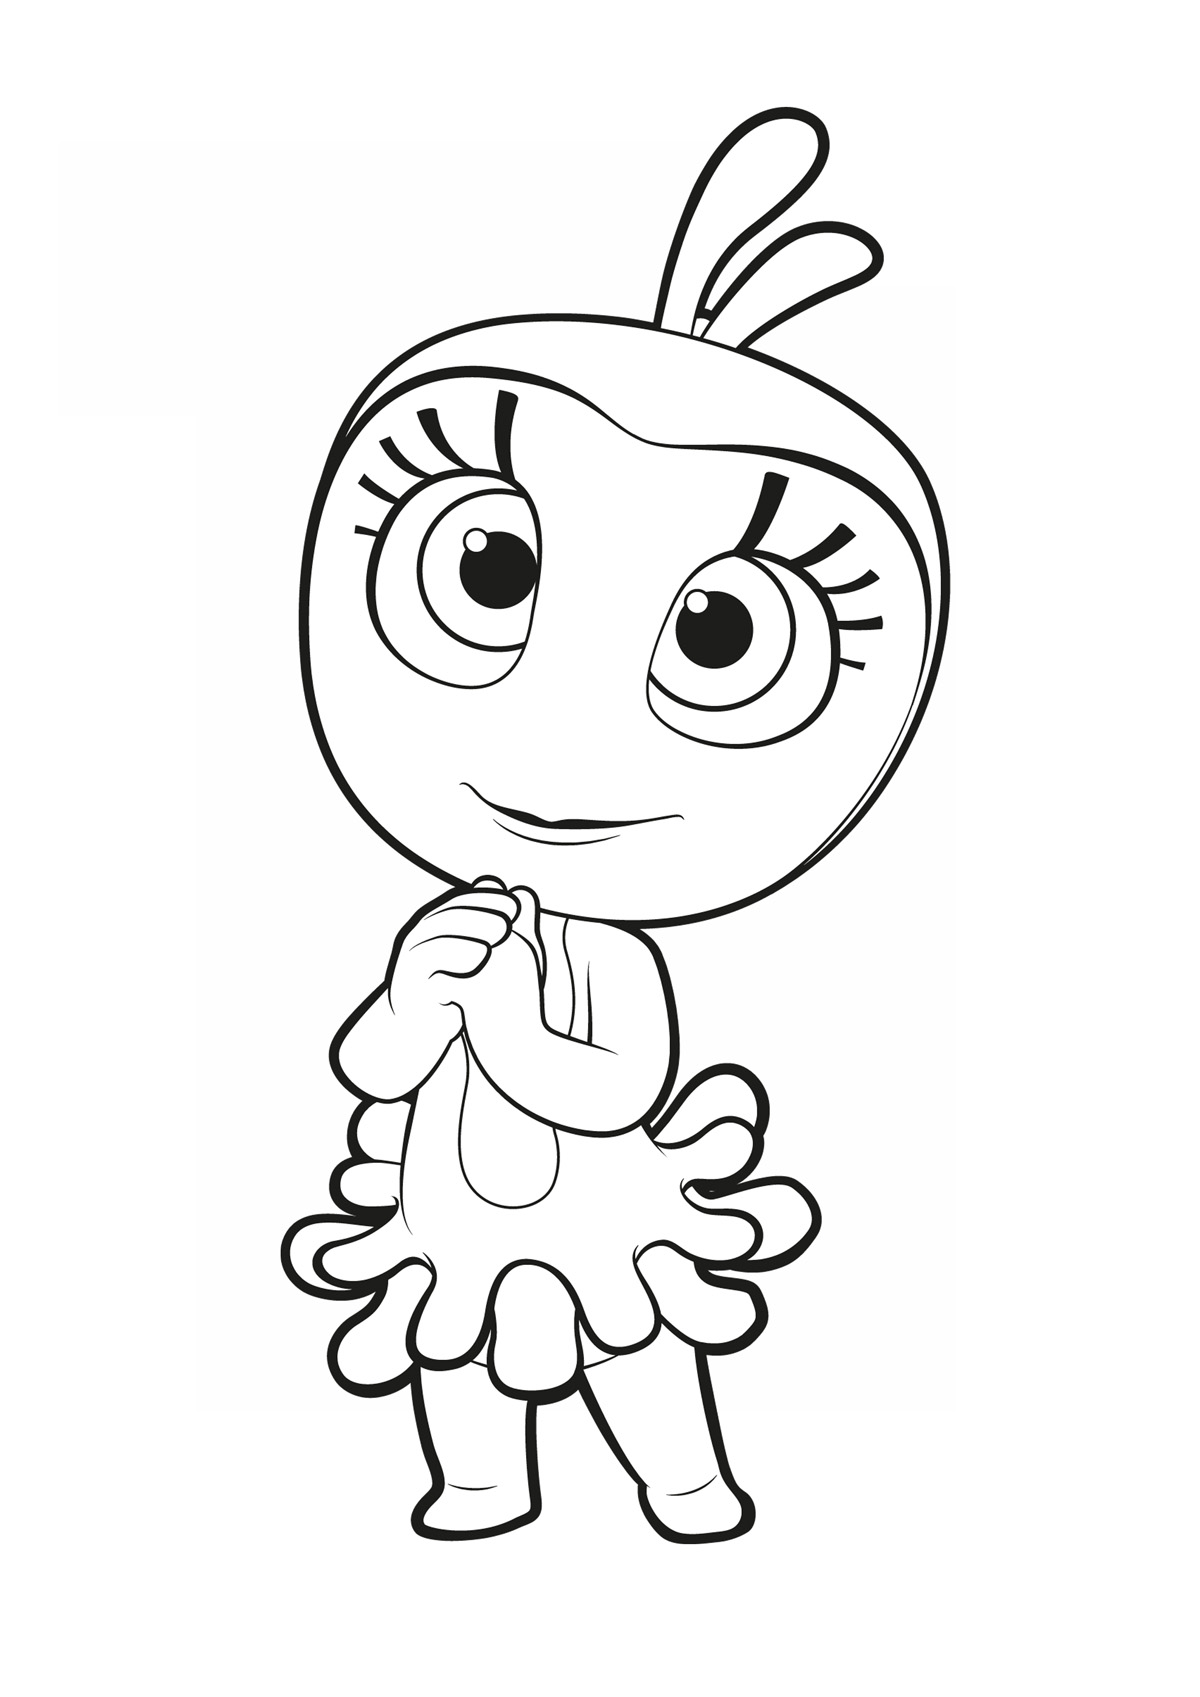 Kate and Mim-Mim coloring pages to download and print for free